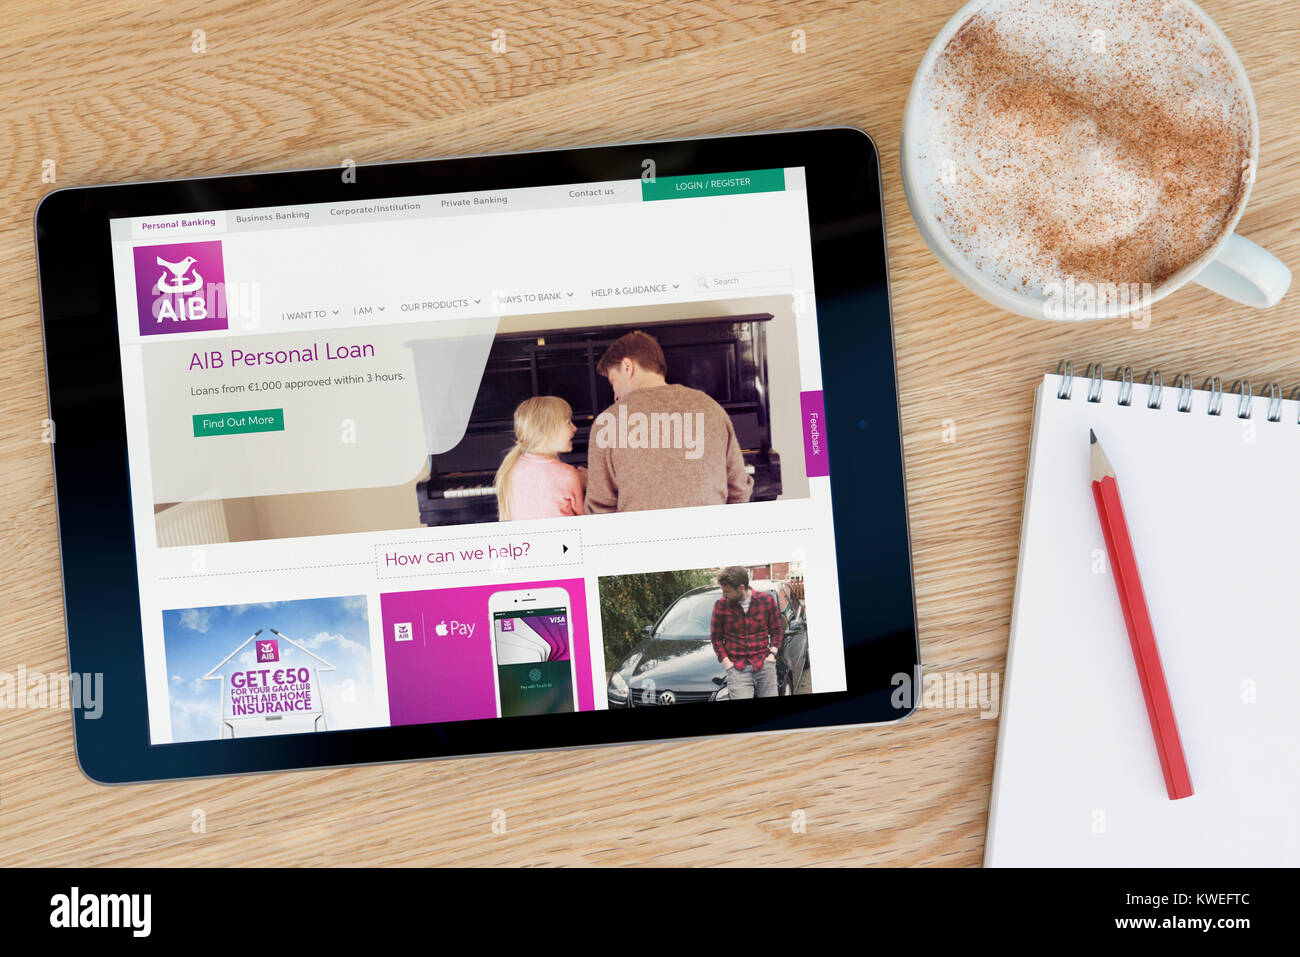 The AIB (Allied Irish Bank) website on an iPad tablet device, resting on a wooden table beside a notepad, pencil and cup of coffee (Editorial only) Stock Photo